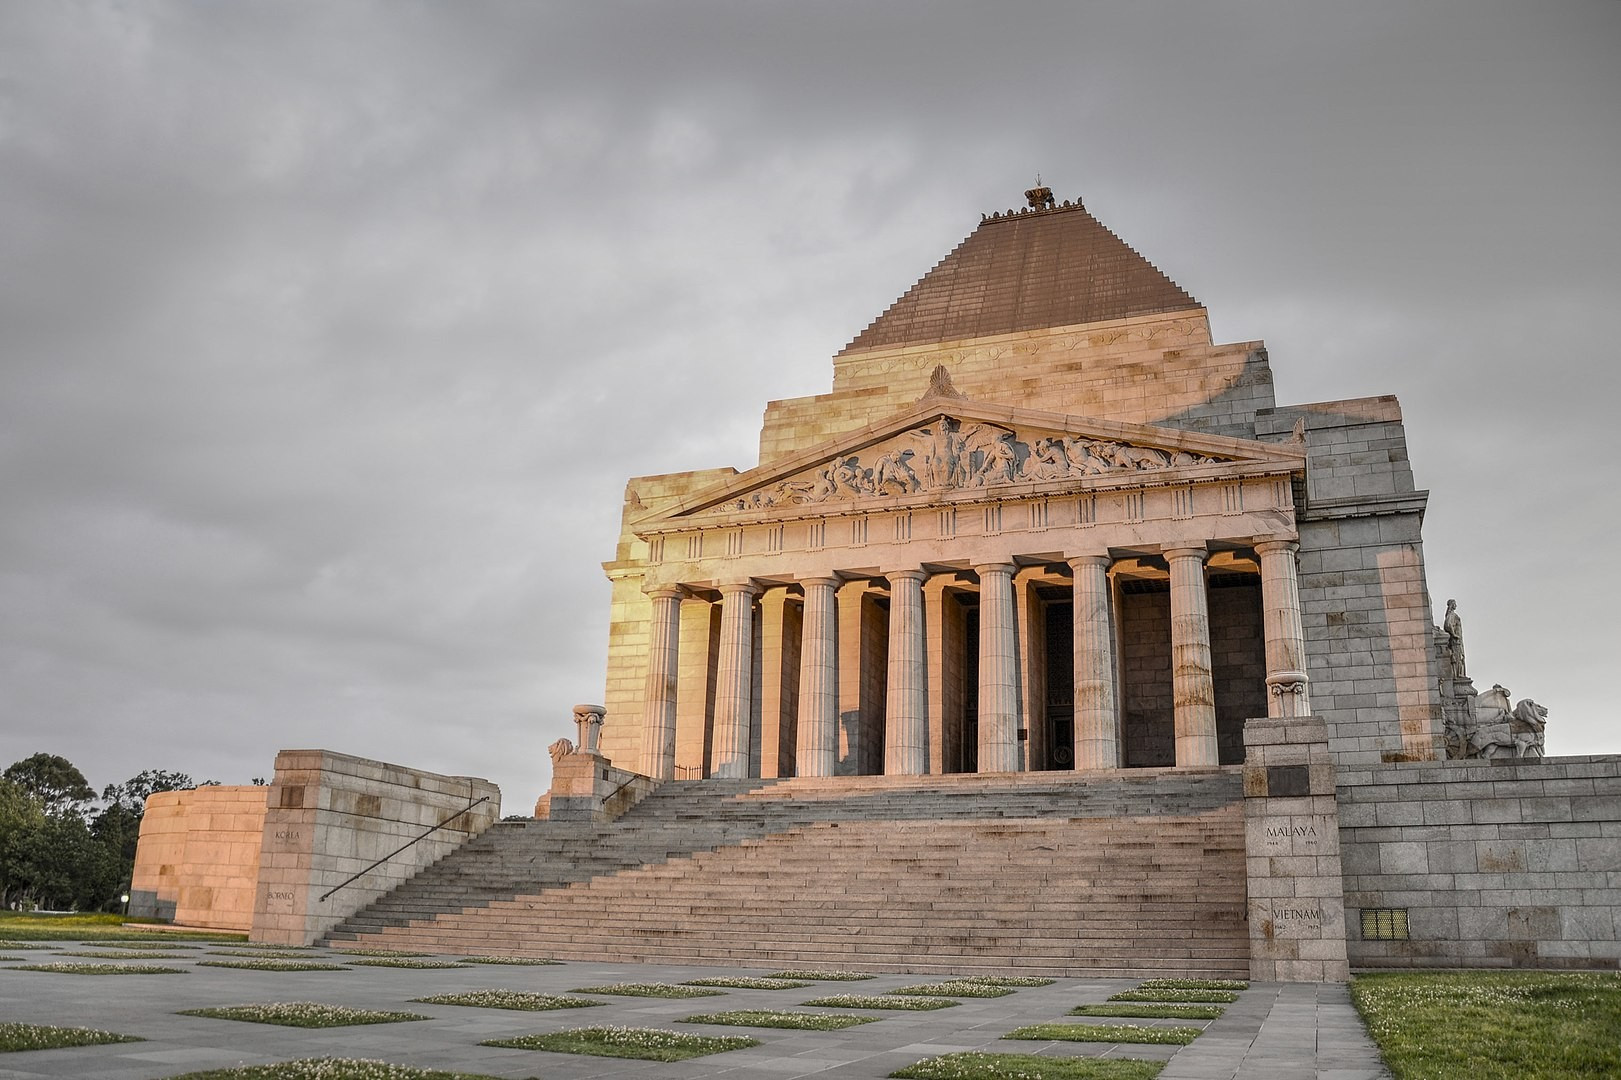 By Jorge Láscar from Australia - Shrine of Rememberance, CC BY 2.0, https://commons.wikimedia.org/w/index.php?curid=31947734